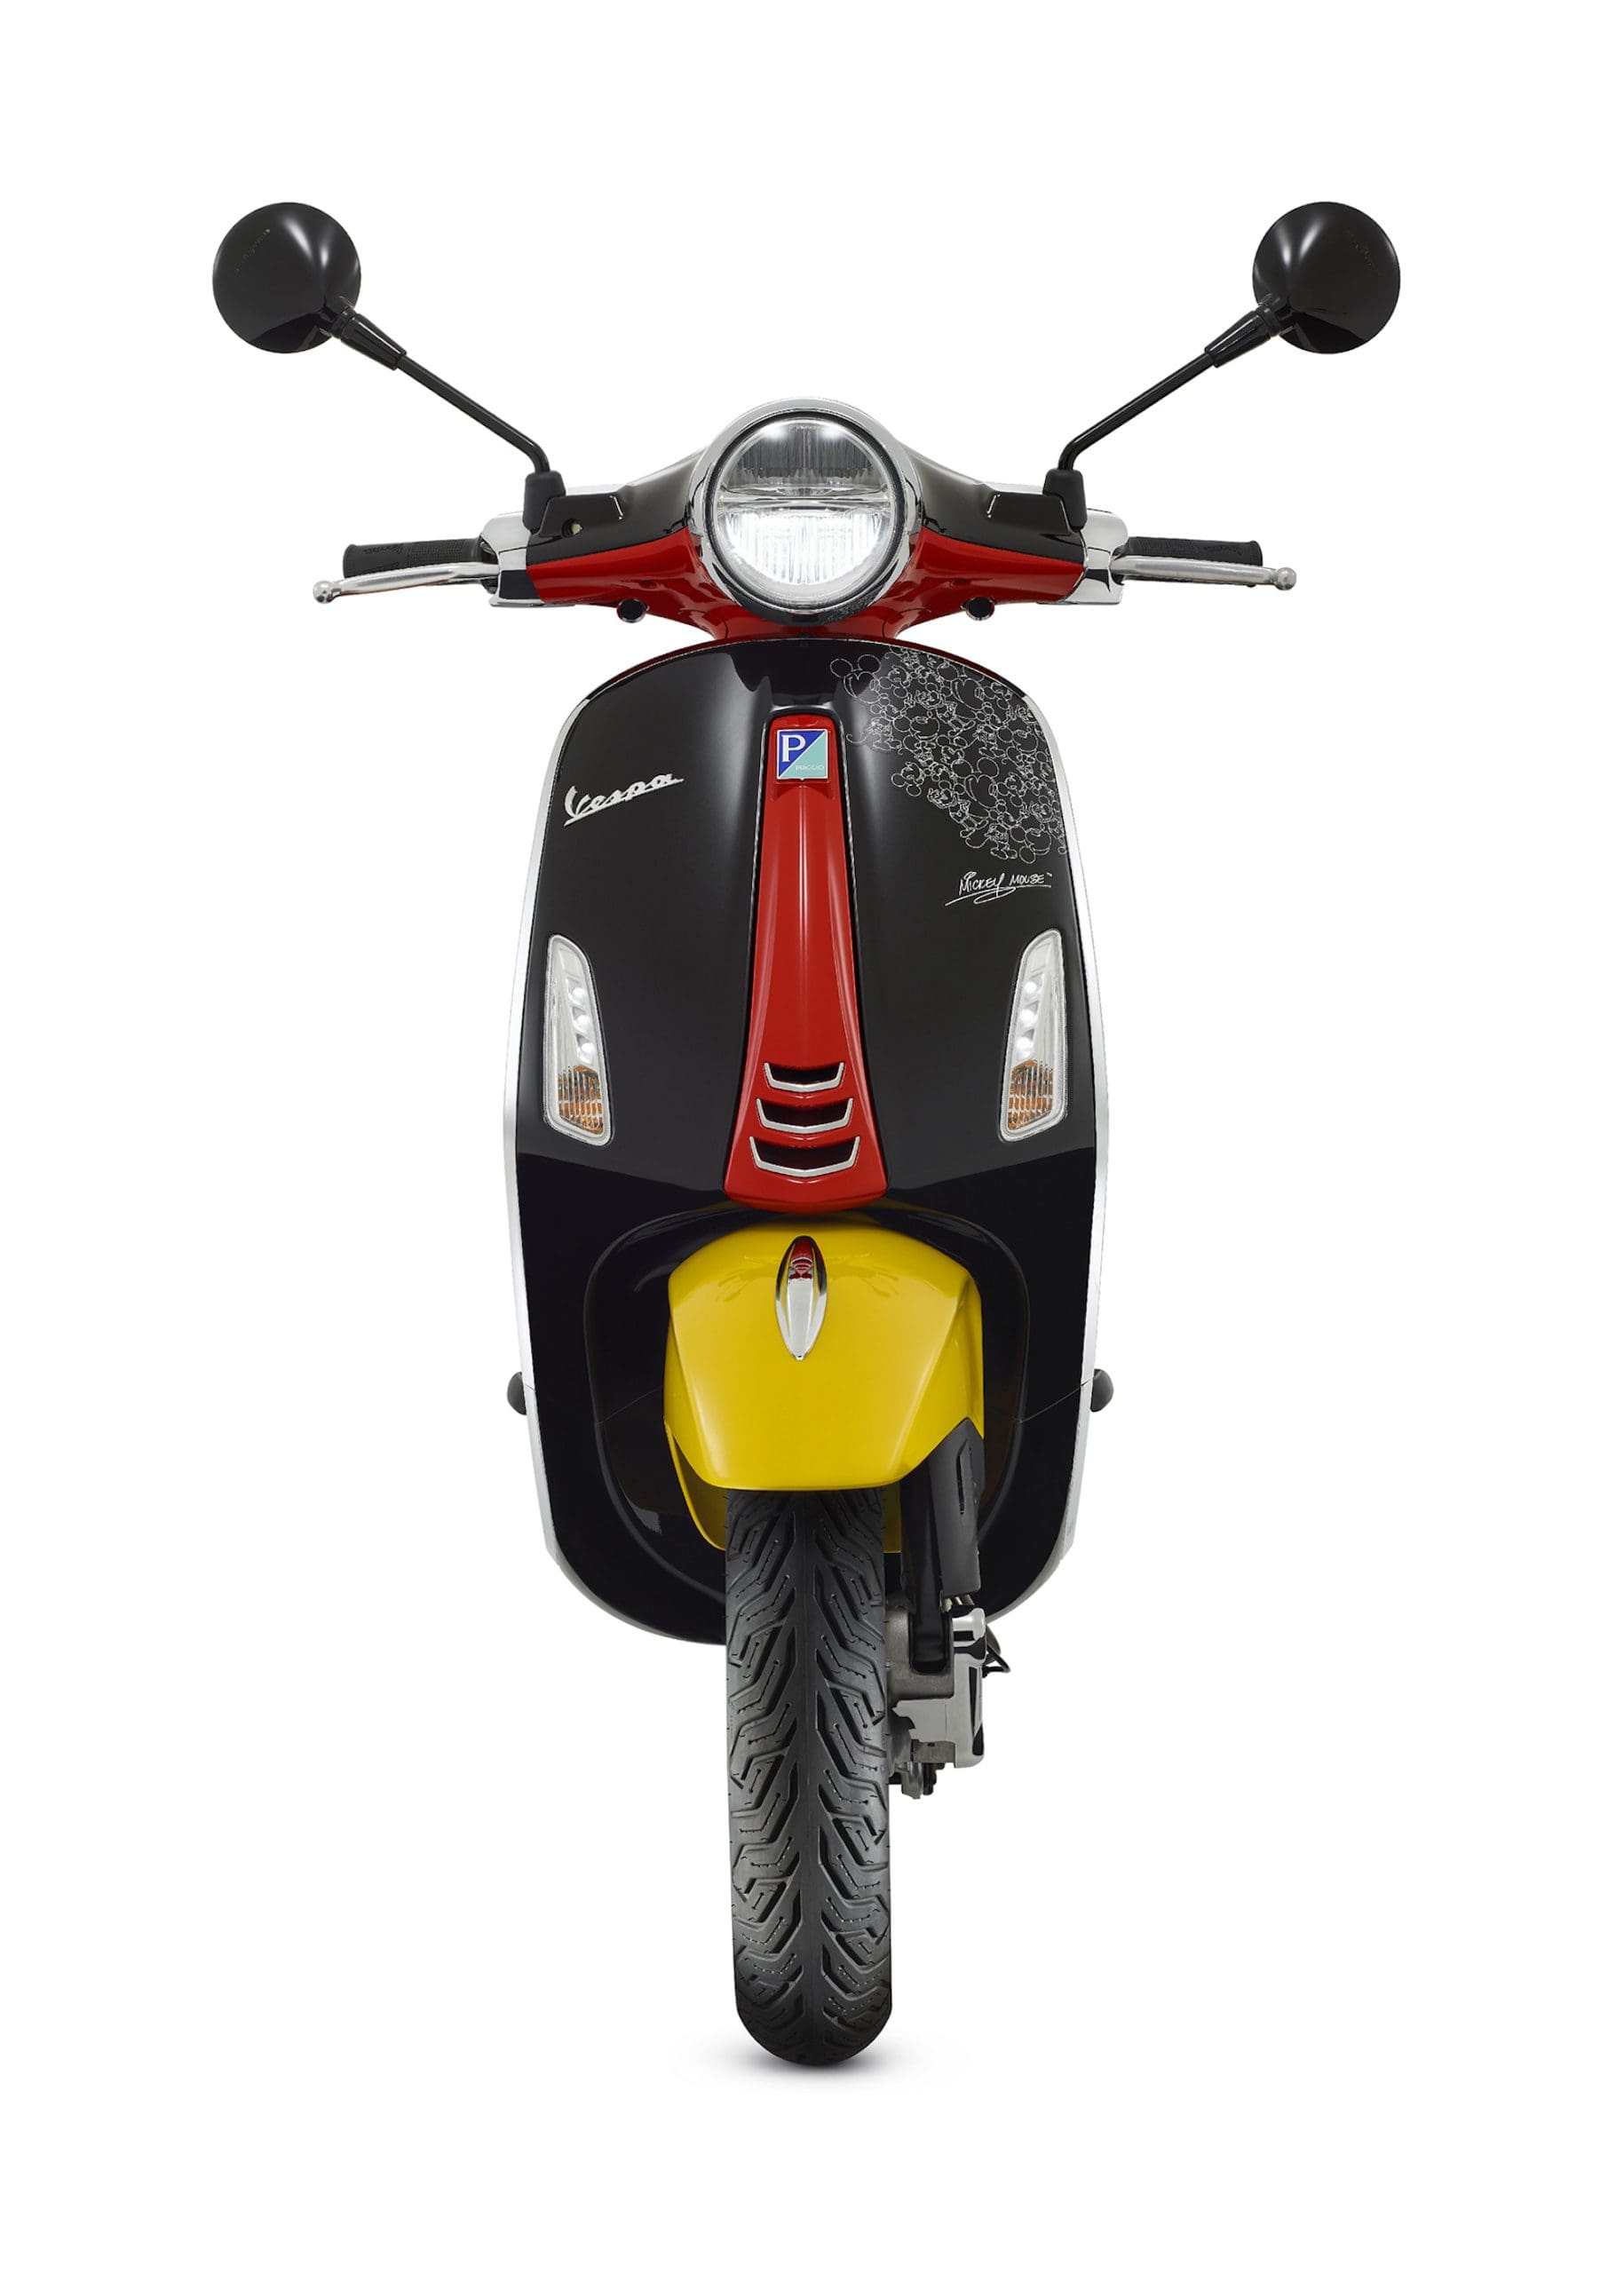 Vespa's 2023 Disney Mickey Mouse Edition scooter, built upon the brand's Primavera model. Media sourced from Piaggio's recent press release.